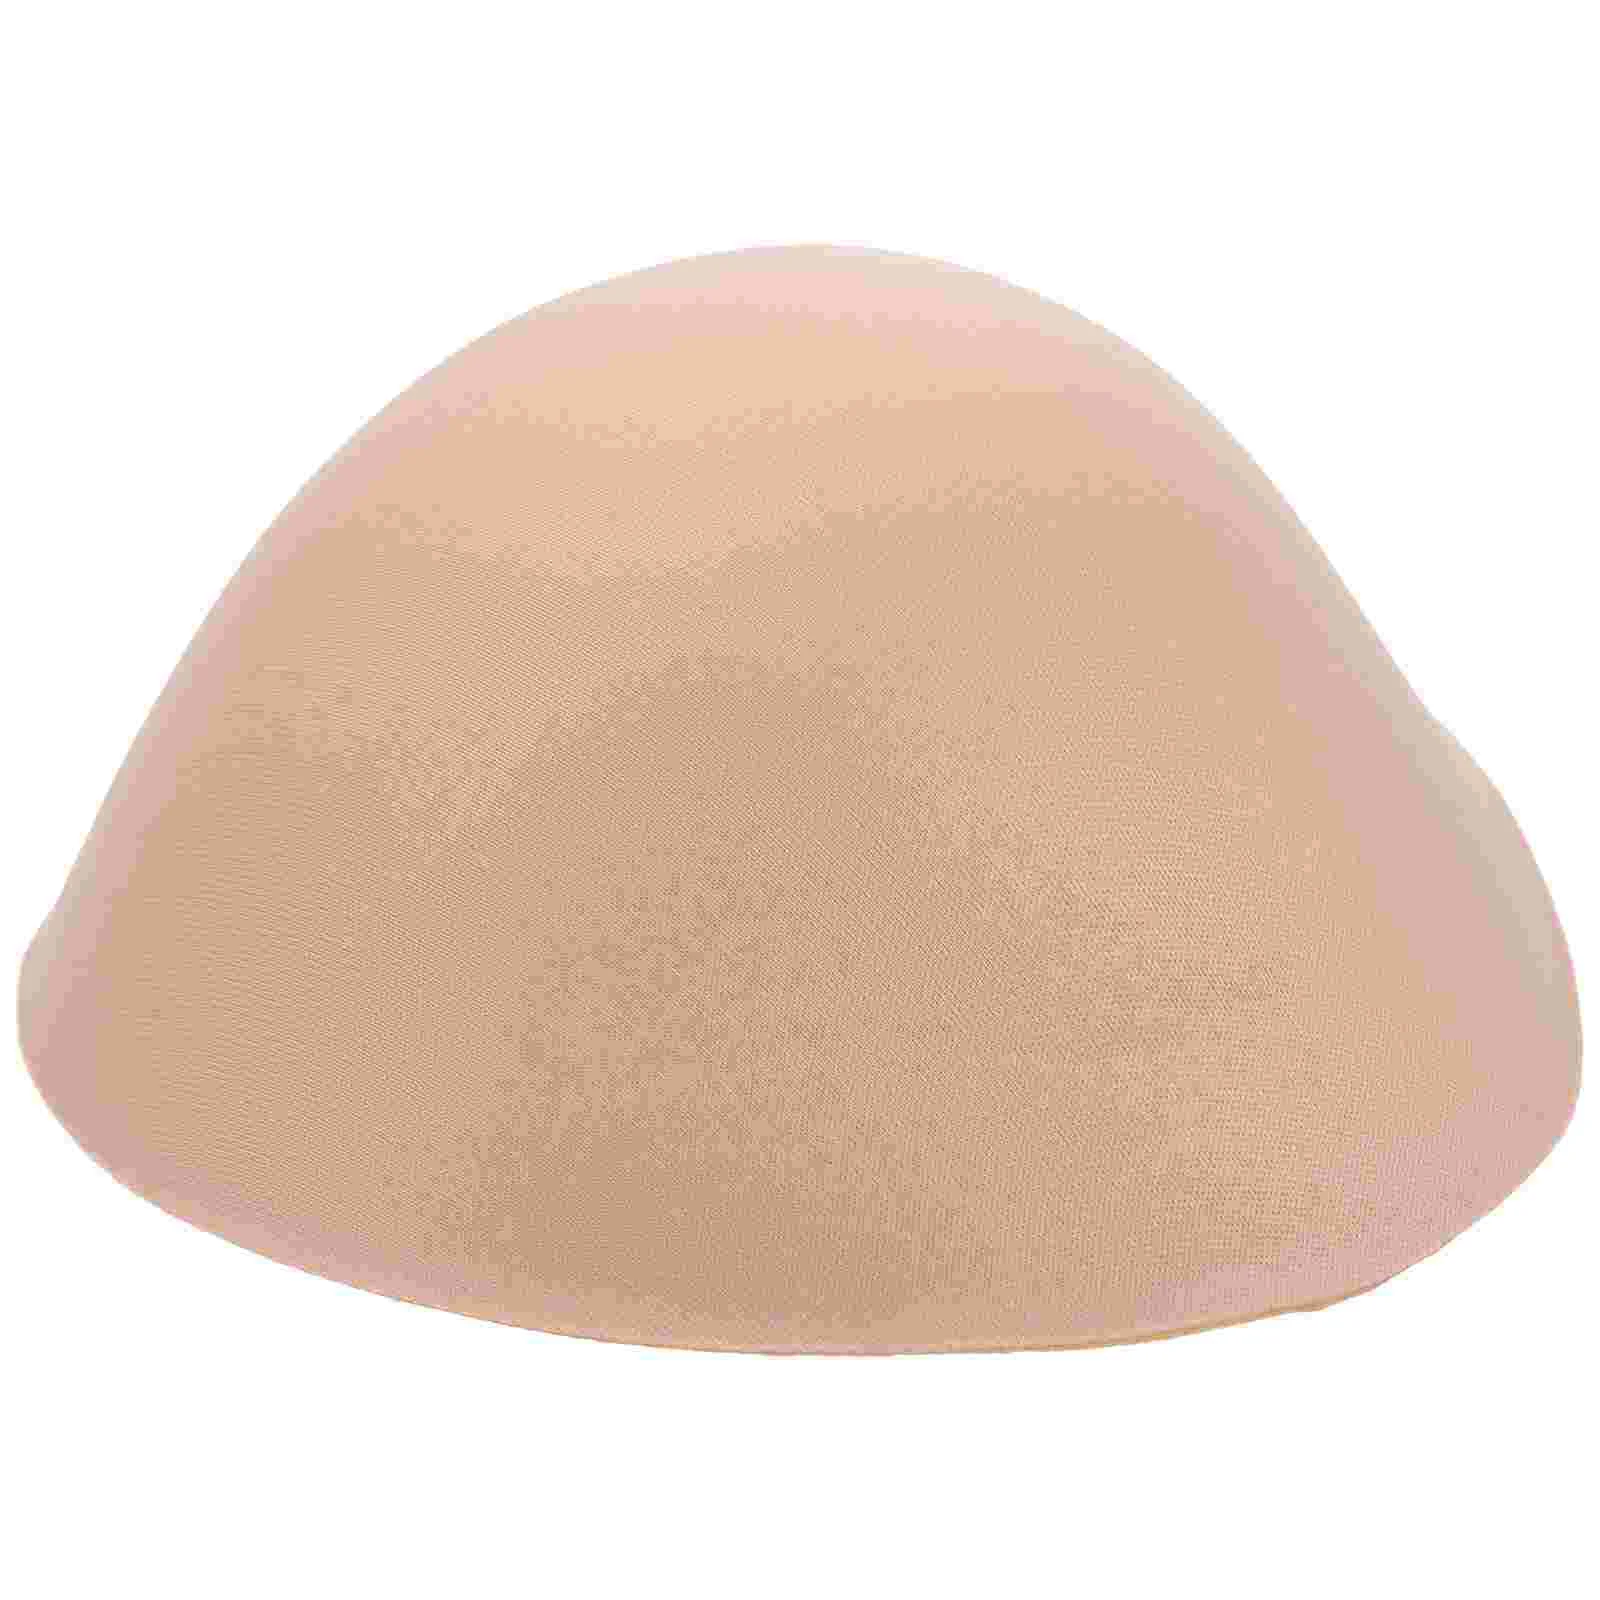 Insert Sponge Pad Removable Pad Inserts Cushion for Mastectomy Prosthesis